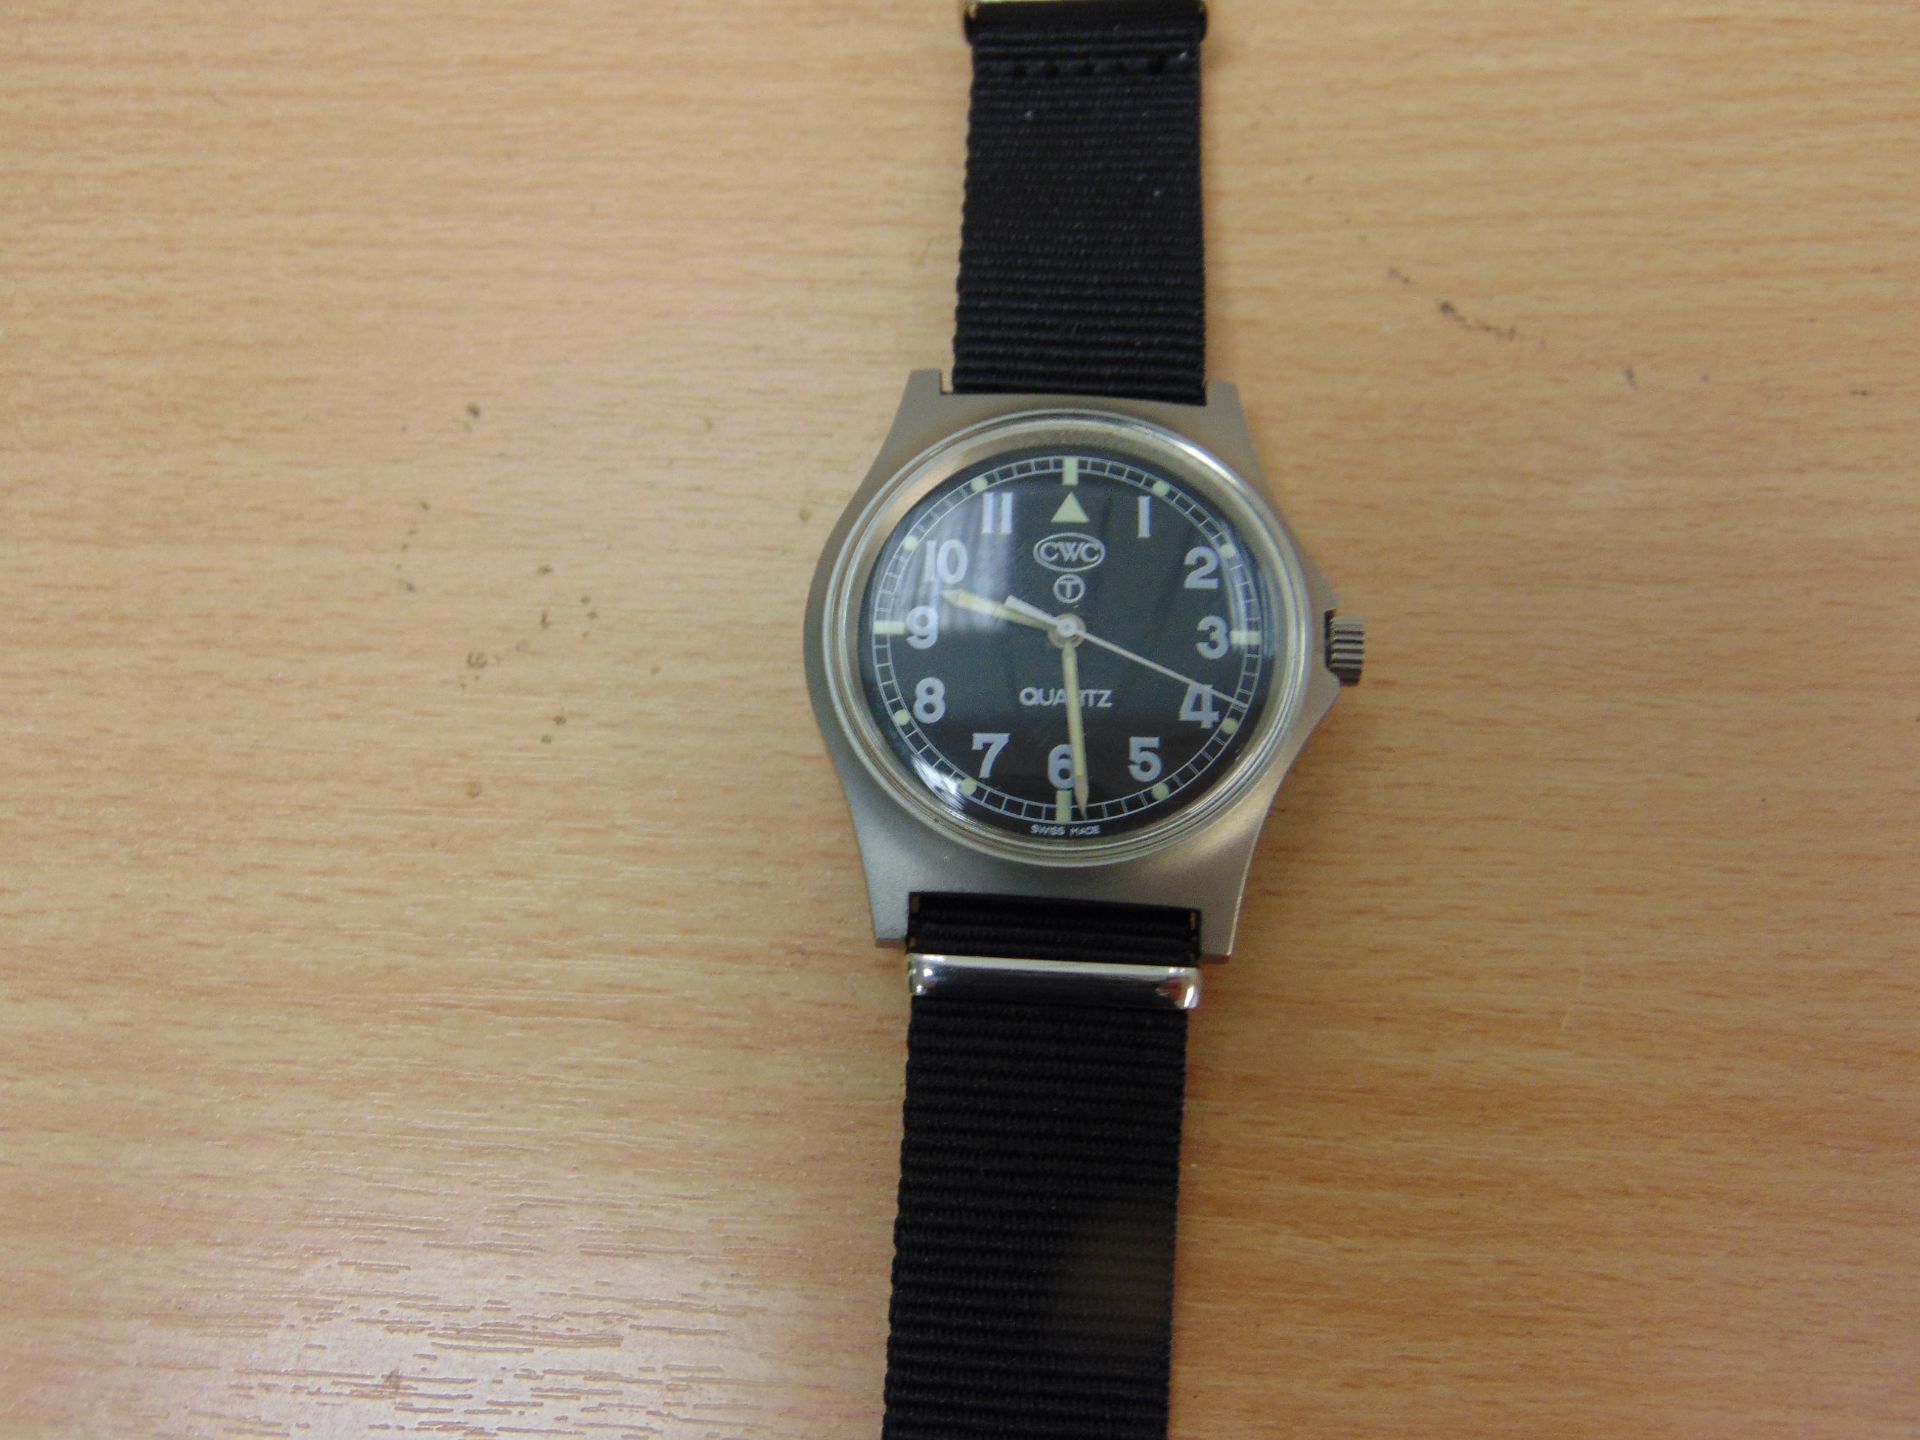 VERY RARE UNISSUED CWC 0552 ROYAL MARINES/NAVY ISSUE SERVICE WATCH, NATO MARKINGS, DATED 1990 - Image 2 of 6